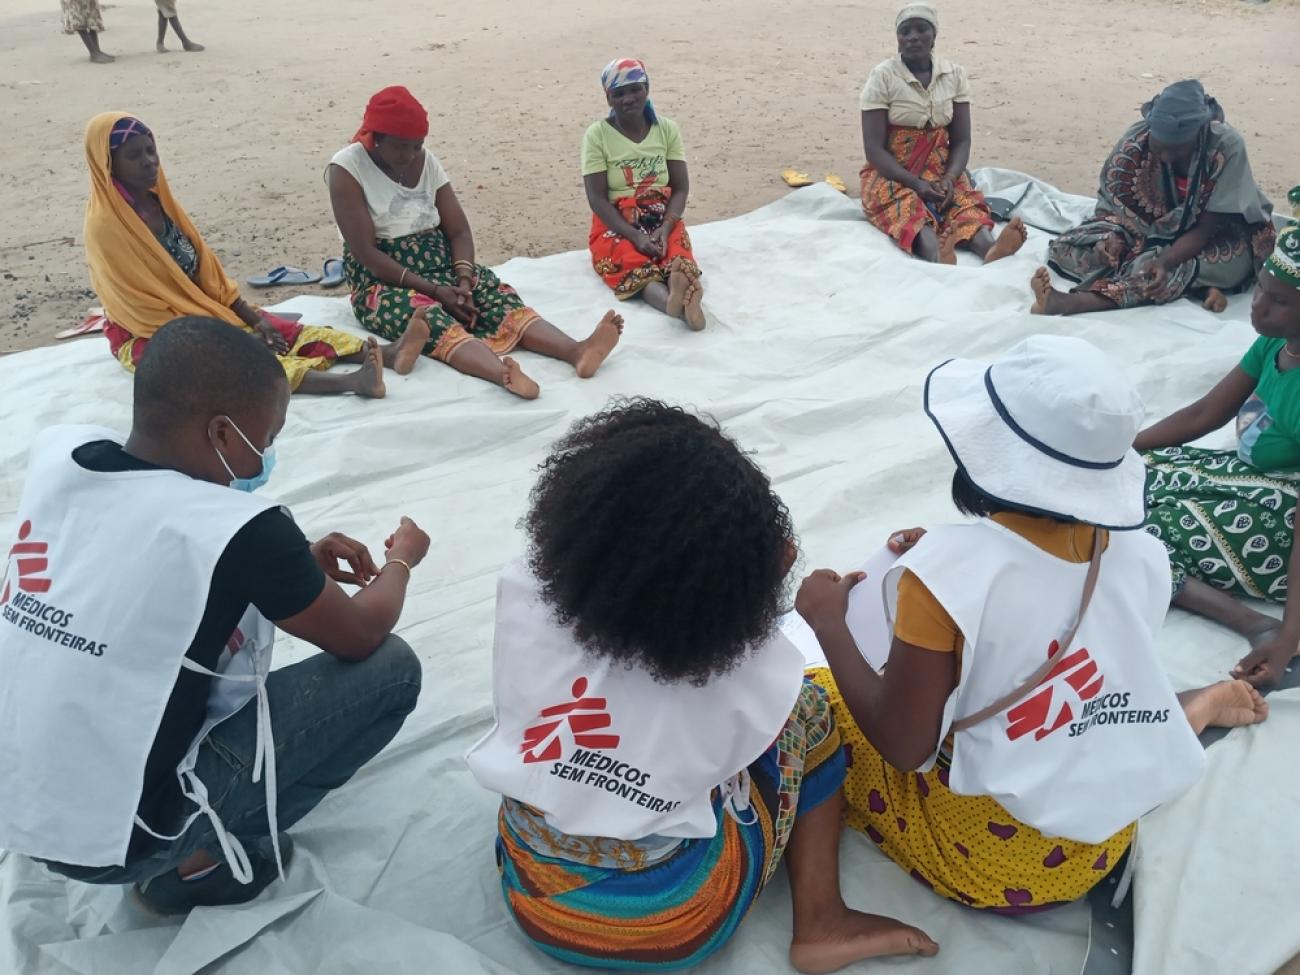 Members of a cultural group of MSF as part of the mental health programme, during a session in Metuge, Cabo Delgado province of Mozambique